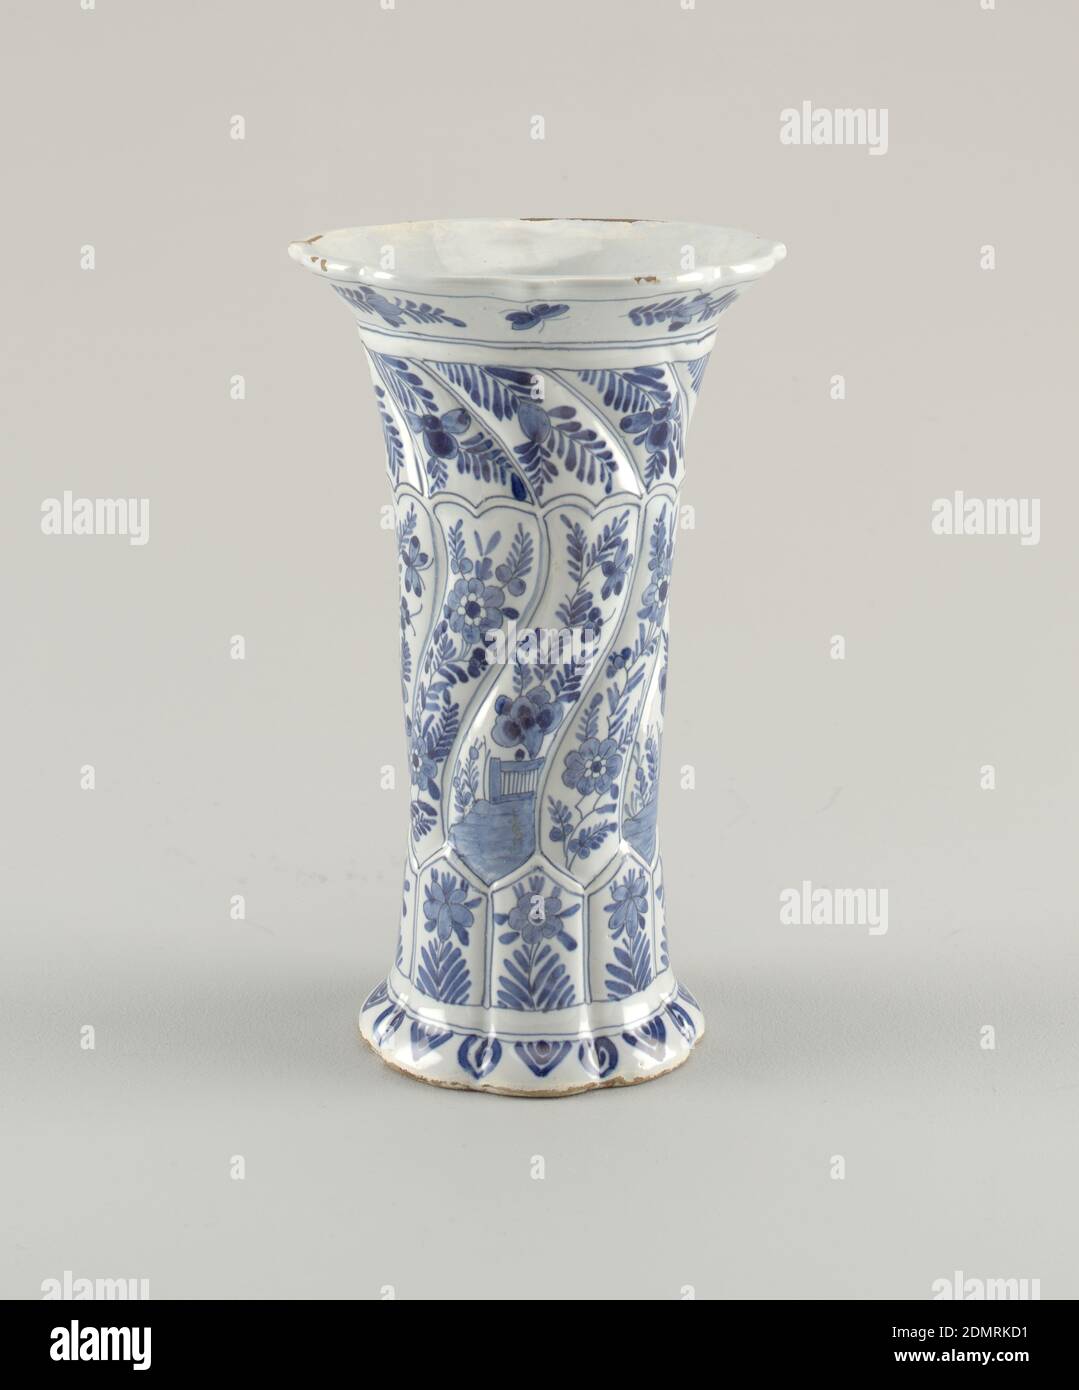 Vase, P V M, Tin-glazed earthenware, Tall, twisted, fluted eight-sided vase with short flared foot and flaring mouth with shaped rim; painted in underglaze blue on white with eight vertical panels each with flower bottom, alternate mid-sections of landscapes or flowers, top section of flowers., Delft, Netherlands, ca. 1800, ceramics, Decorative Arts, Vase Stock Photo